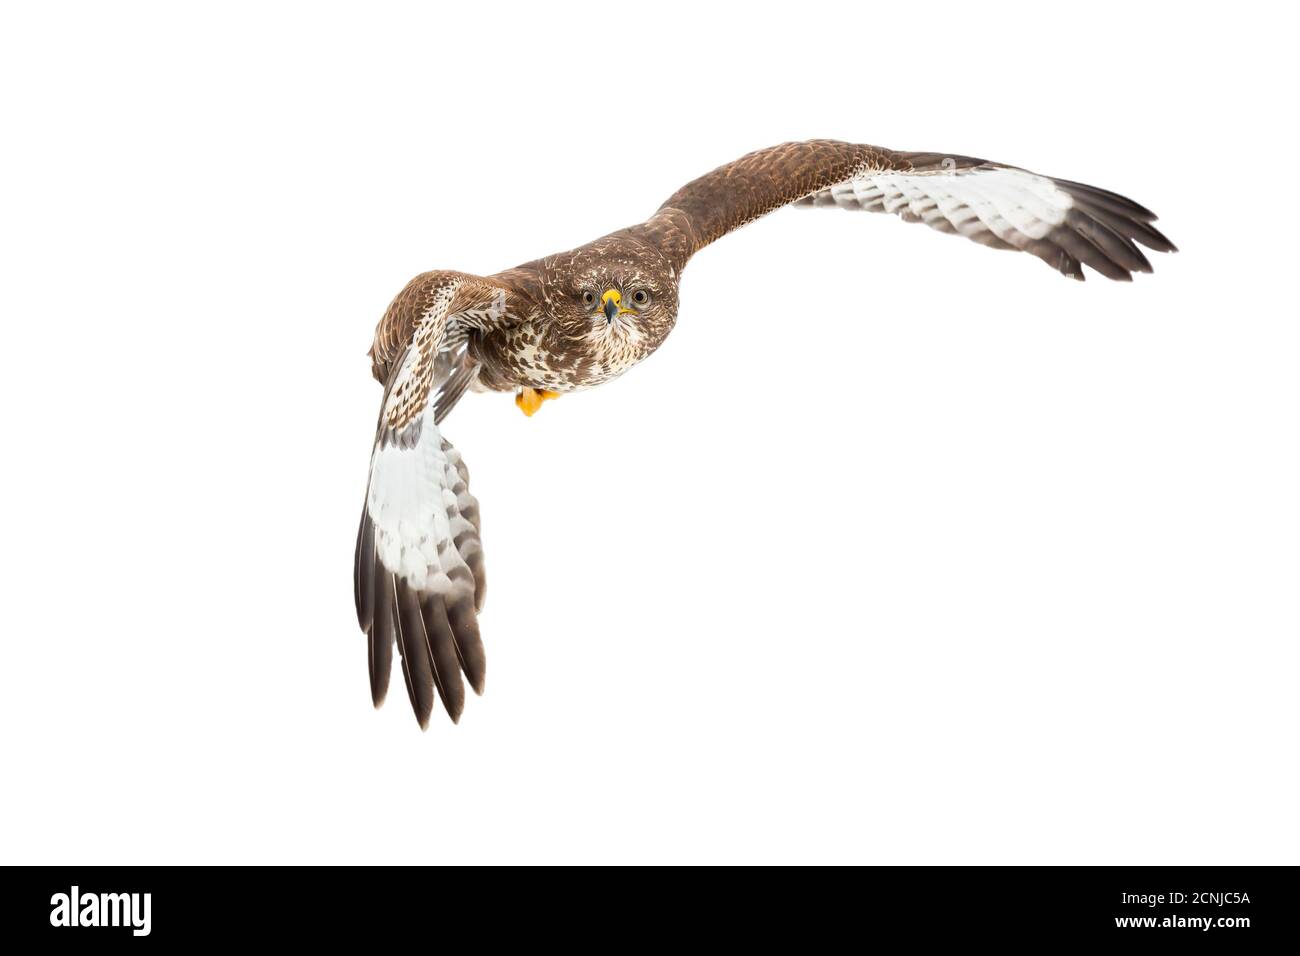 Common buzzard flying in the air isolated on white background. Stock Photo